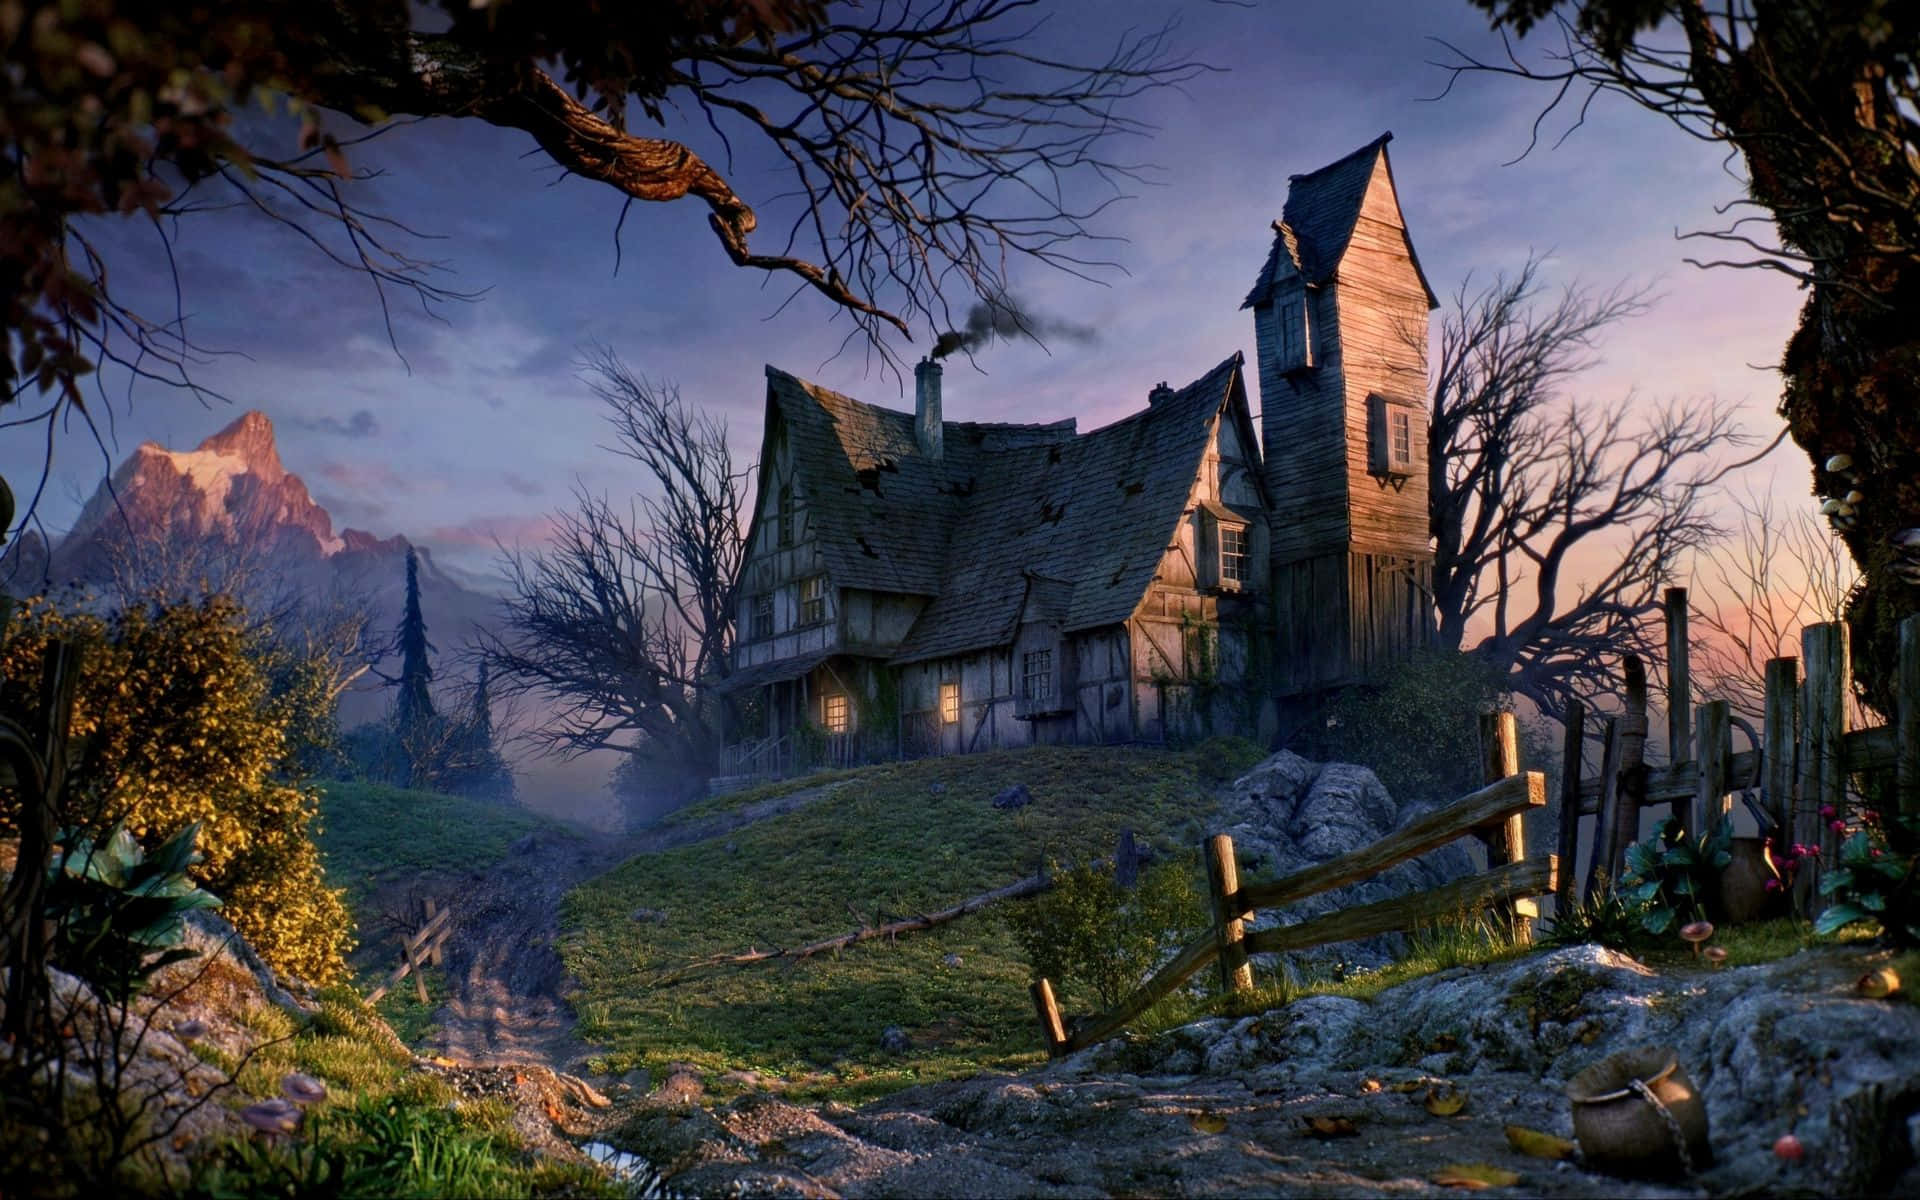 Enter at your own risk! A haunted house awaits the brave and daring.